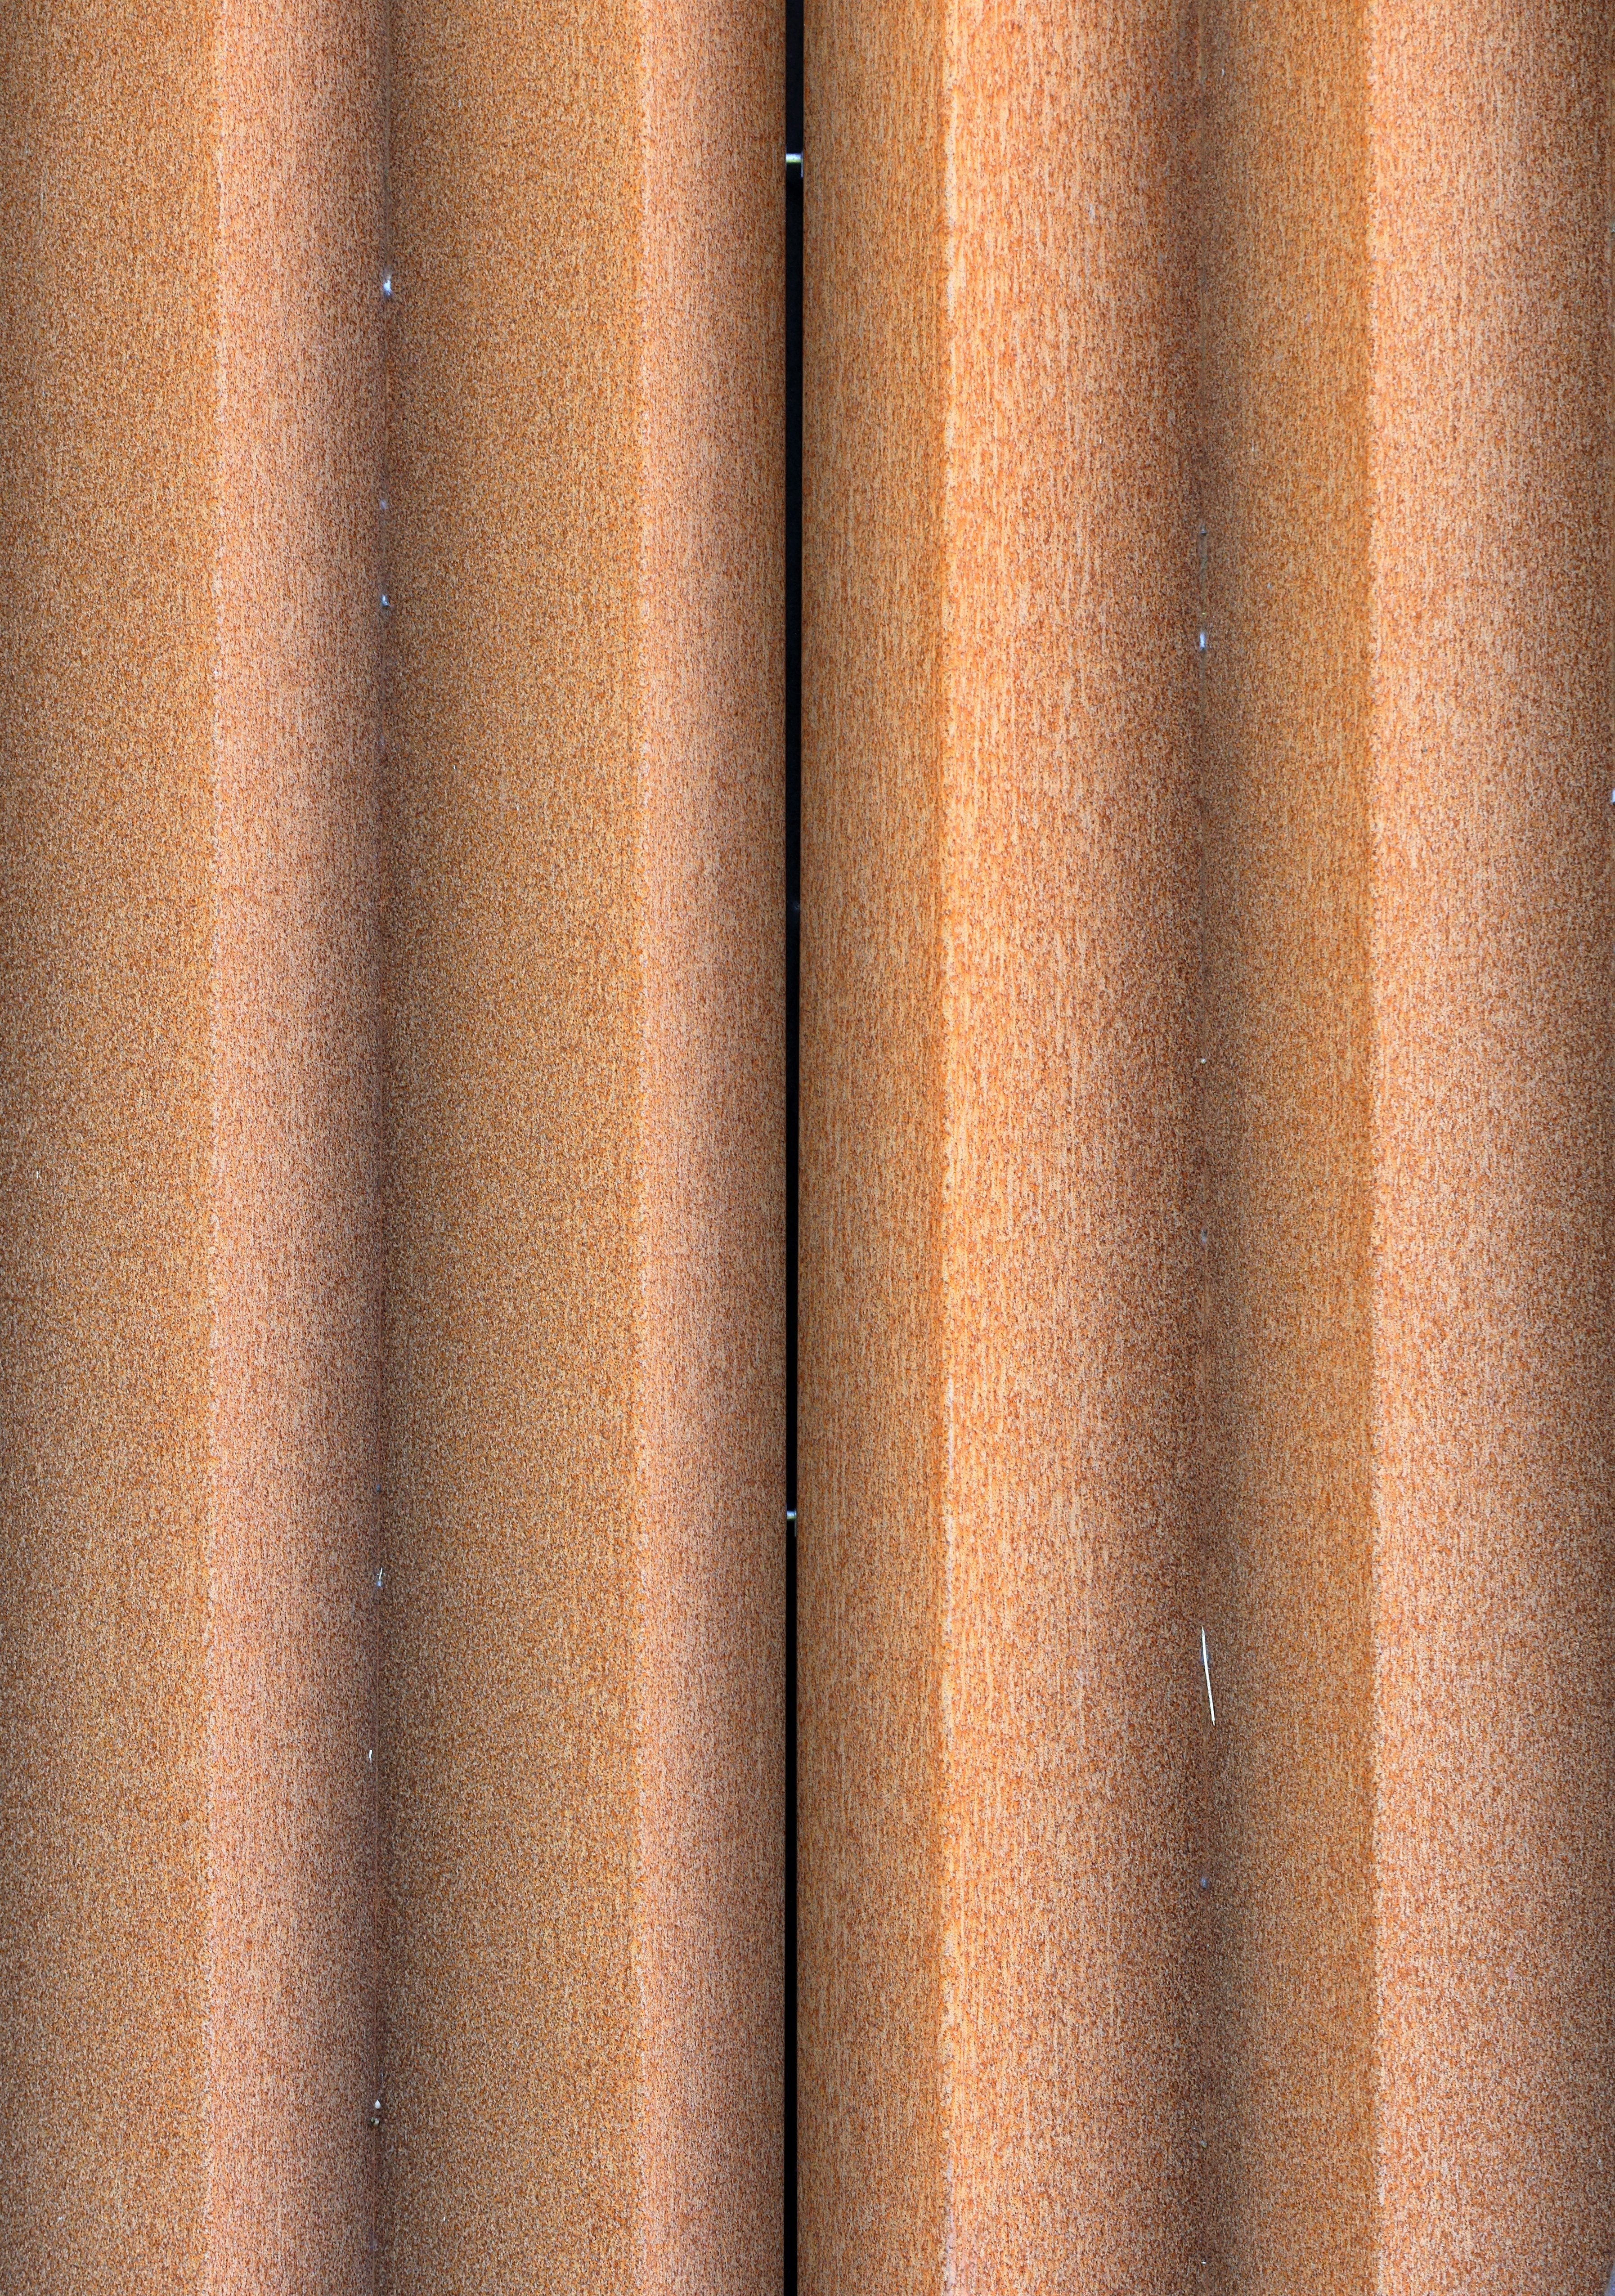 brown textile in close up photography